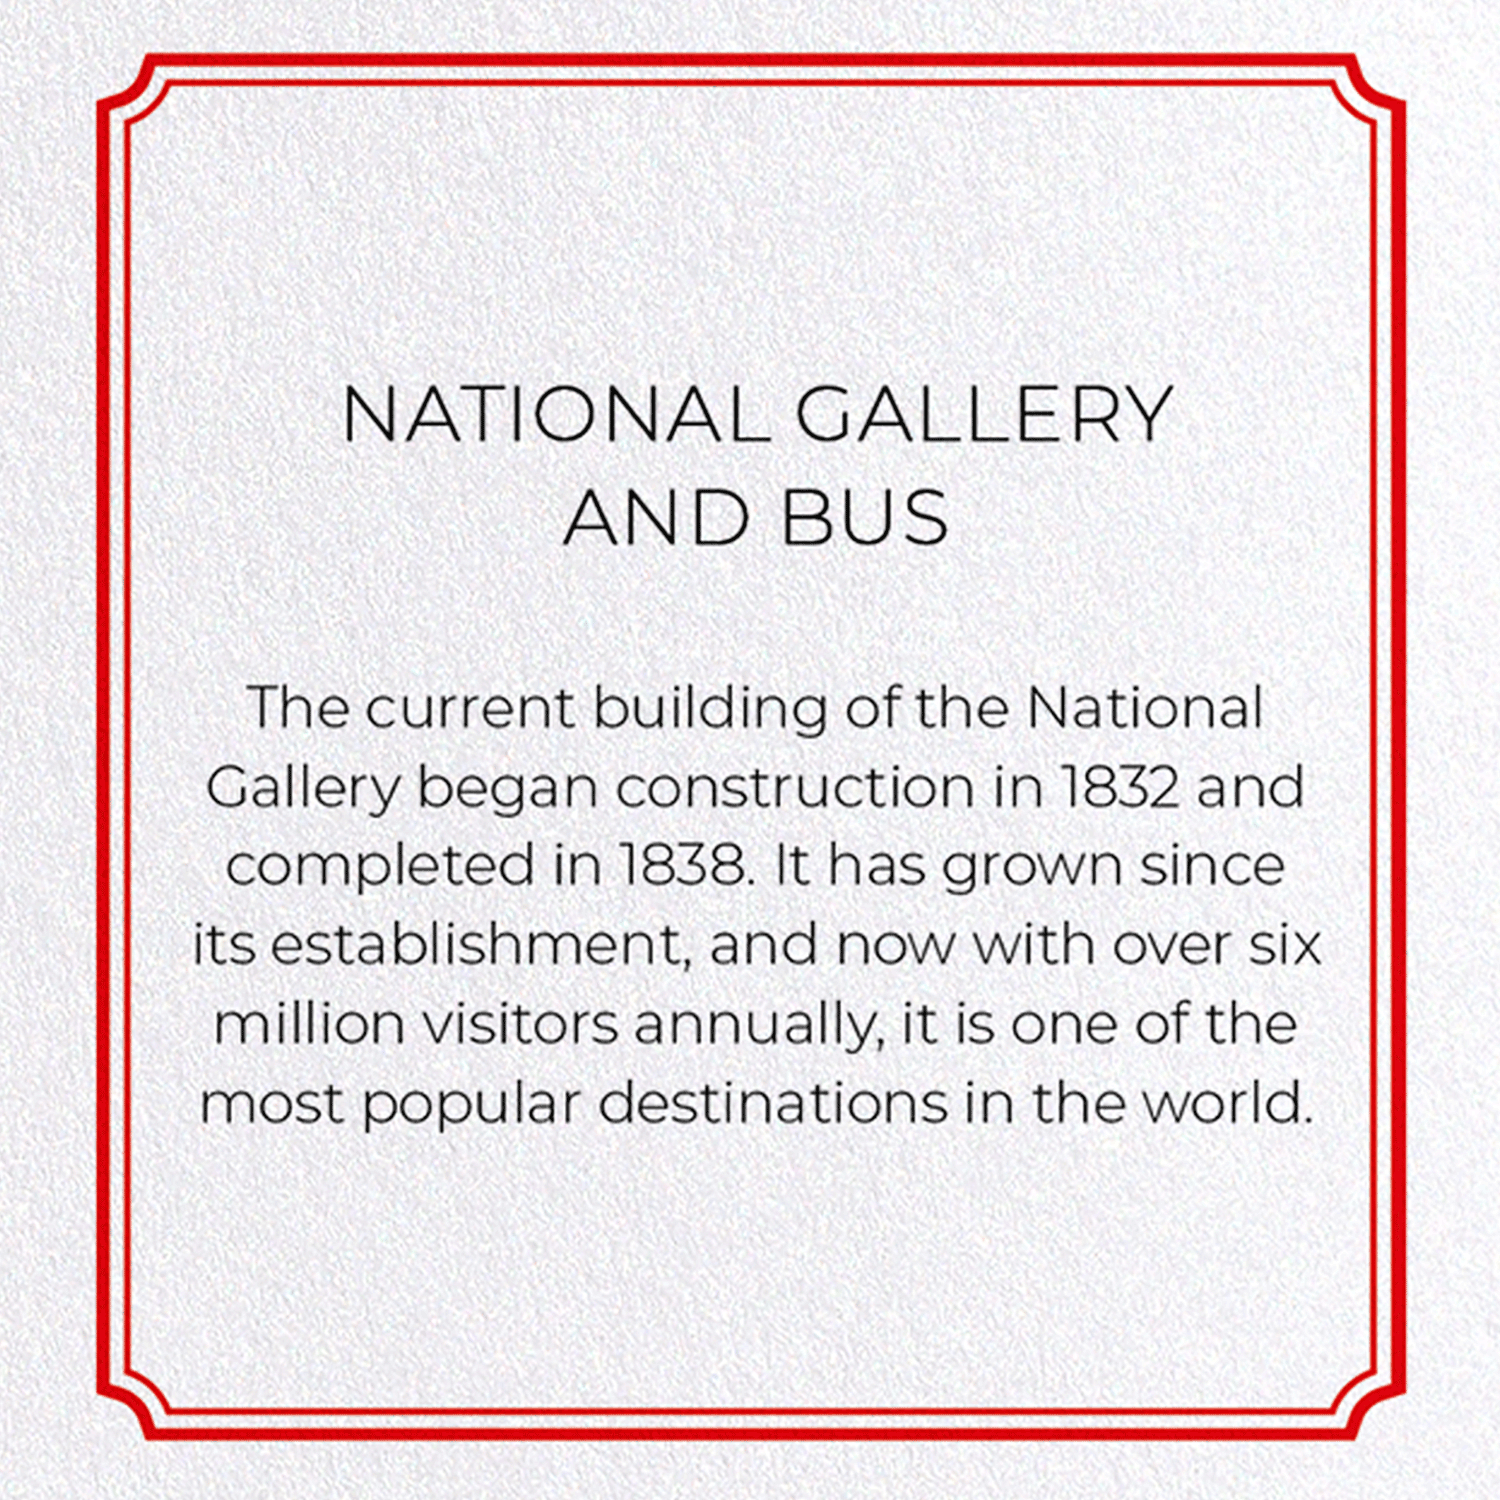 NATIONAL GALLERY AND BUS